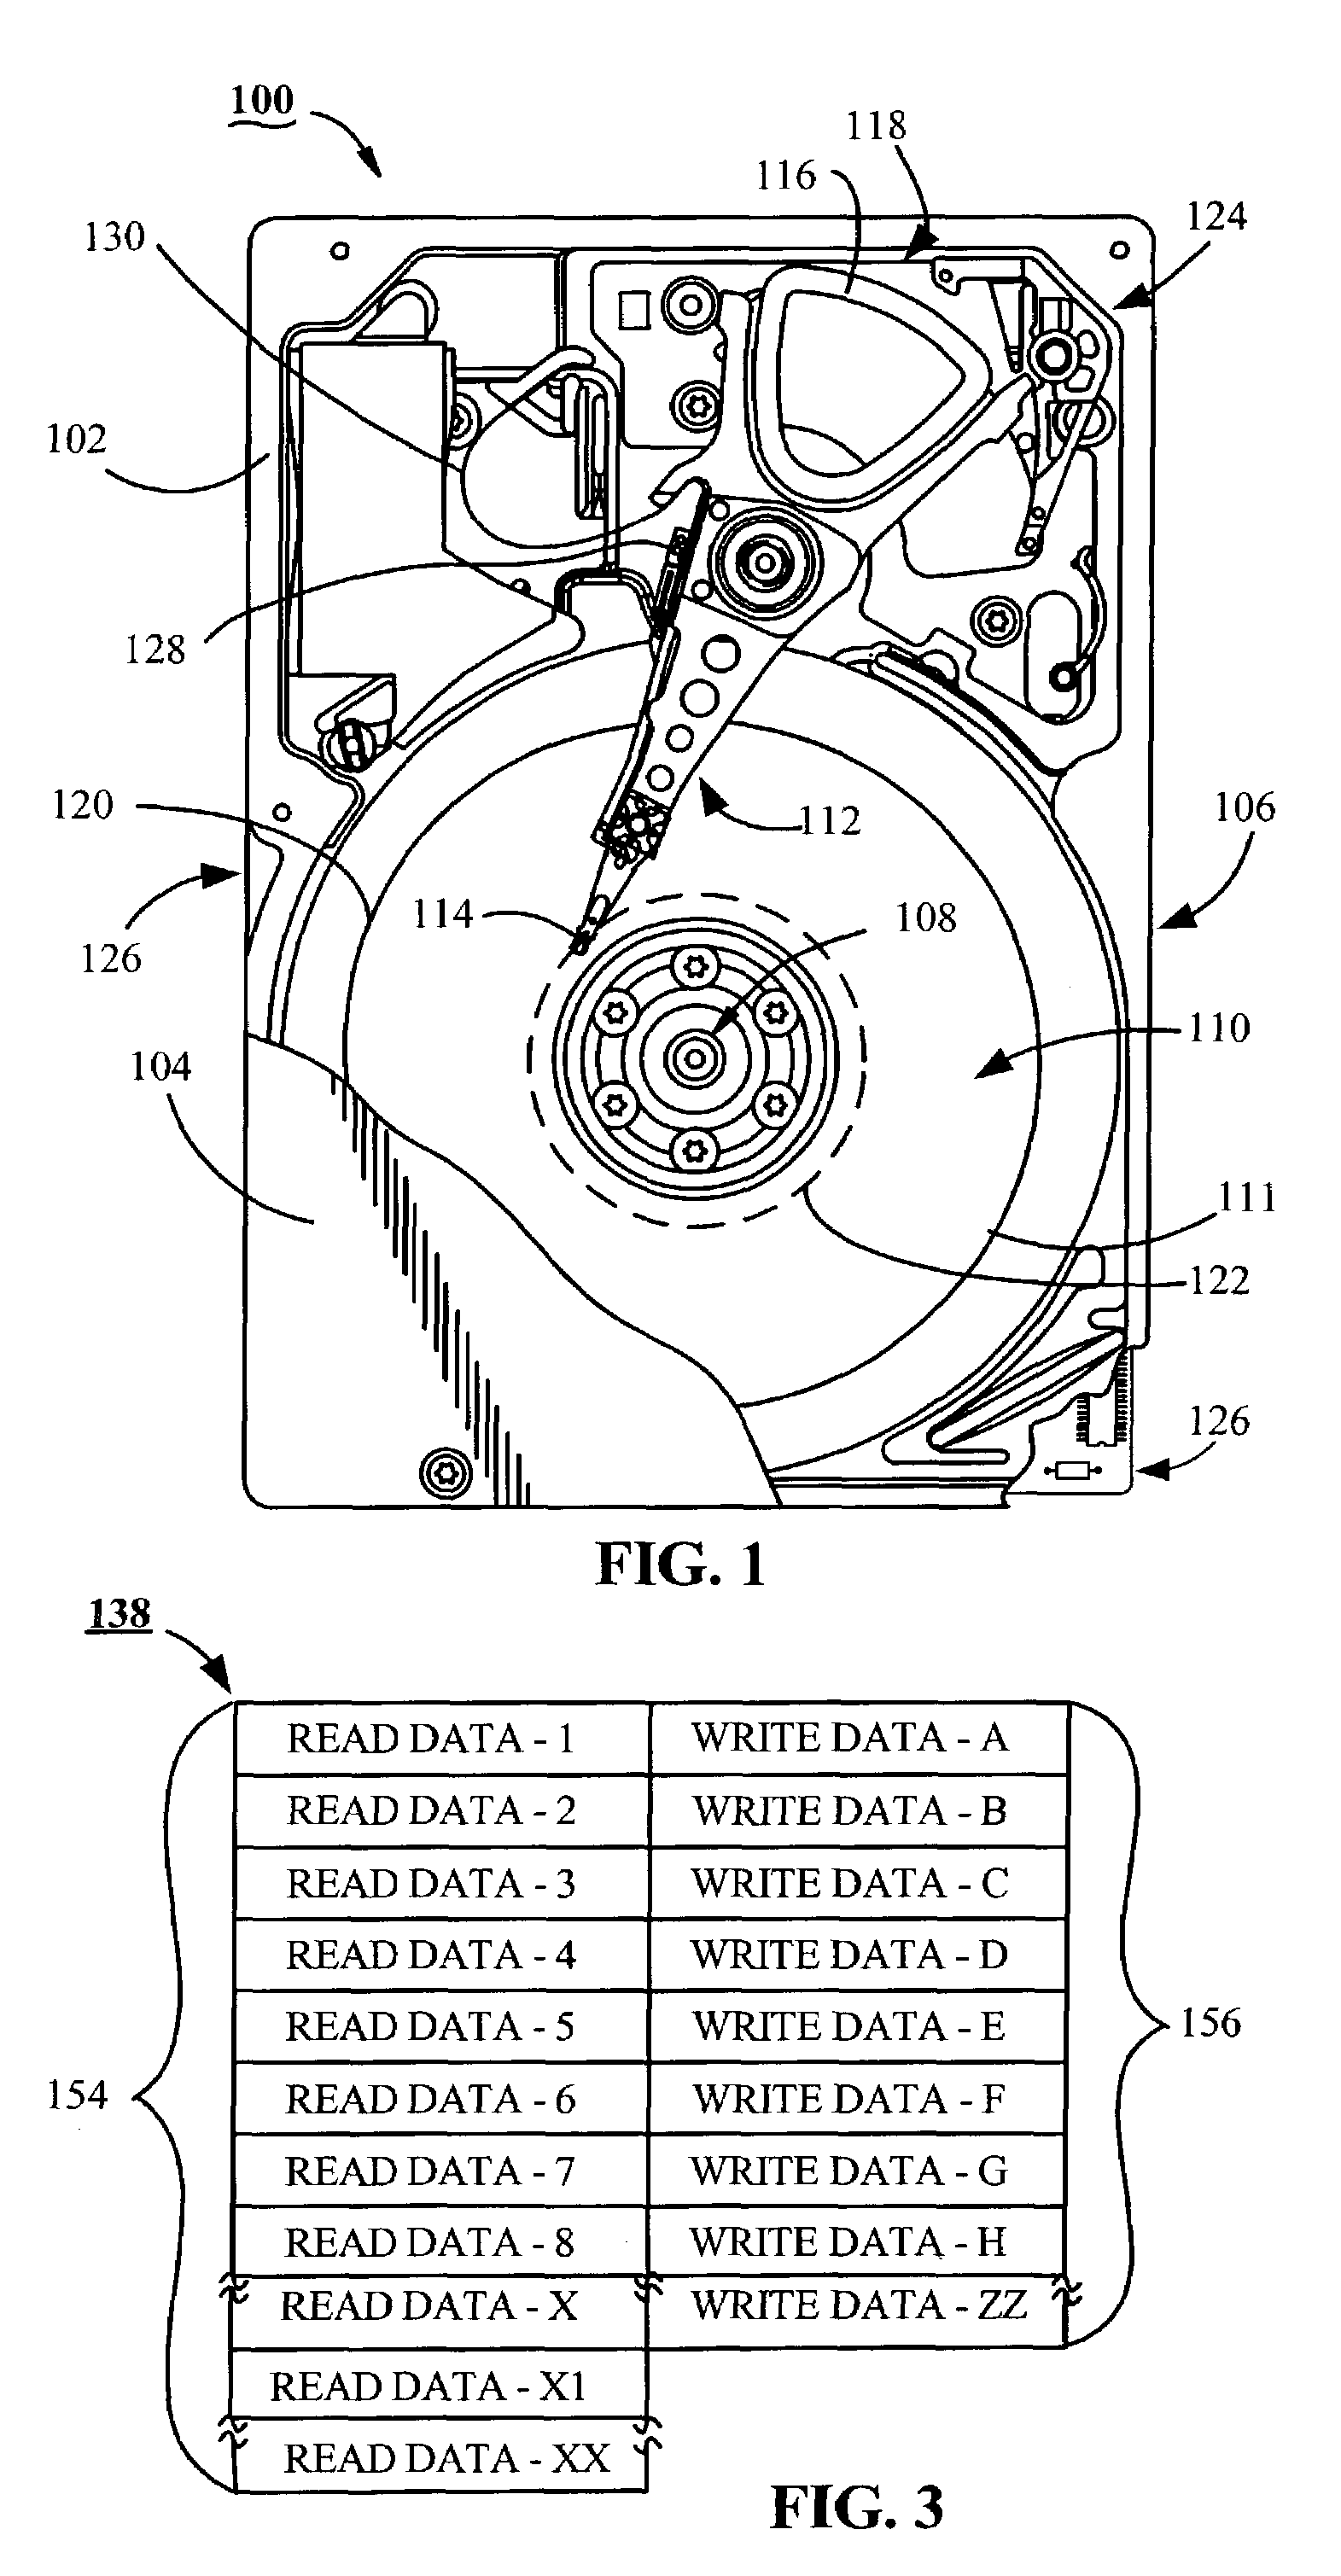 Adaptive resource controlled write-back aging for a data storage device